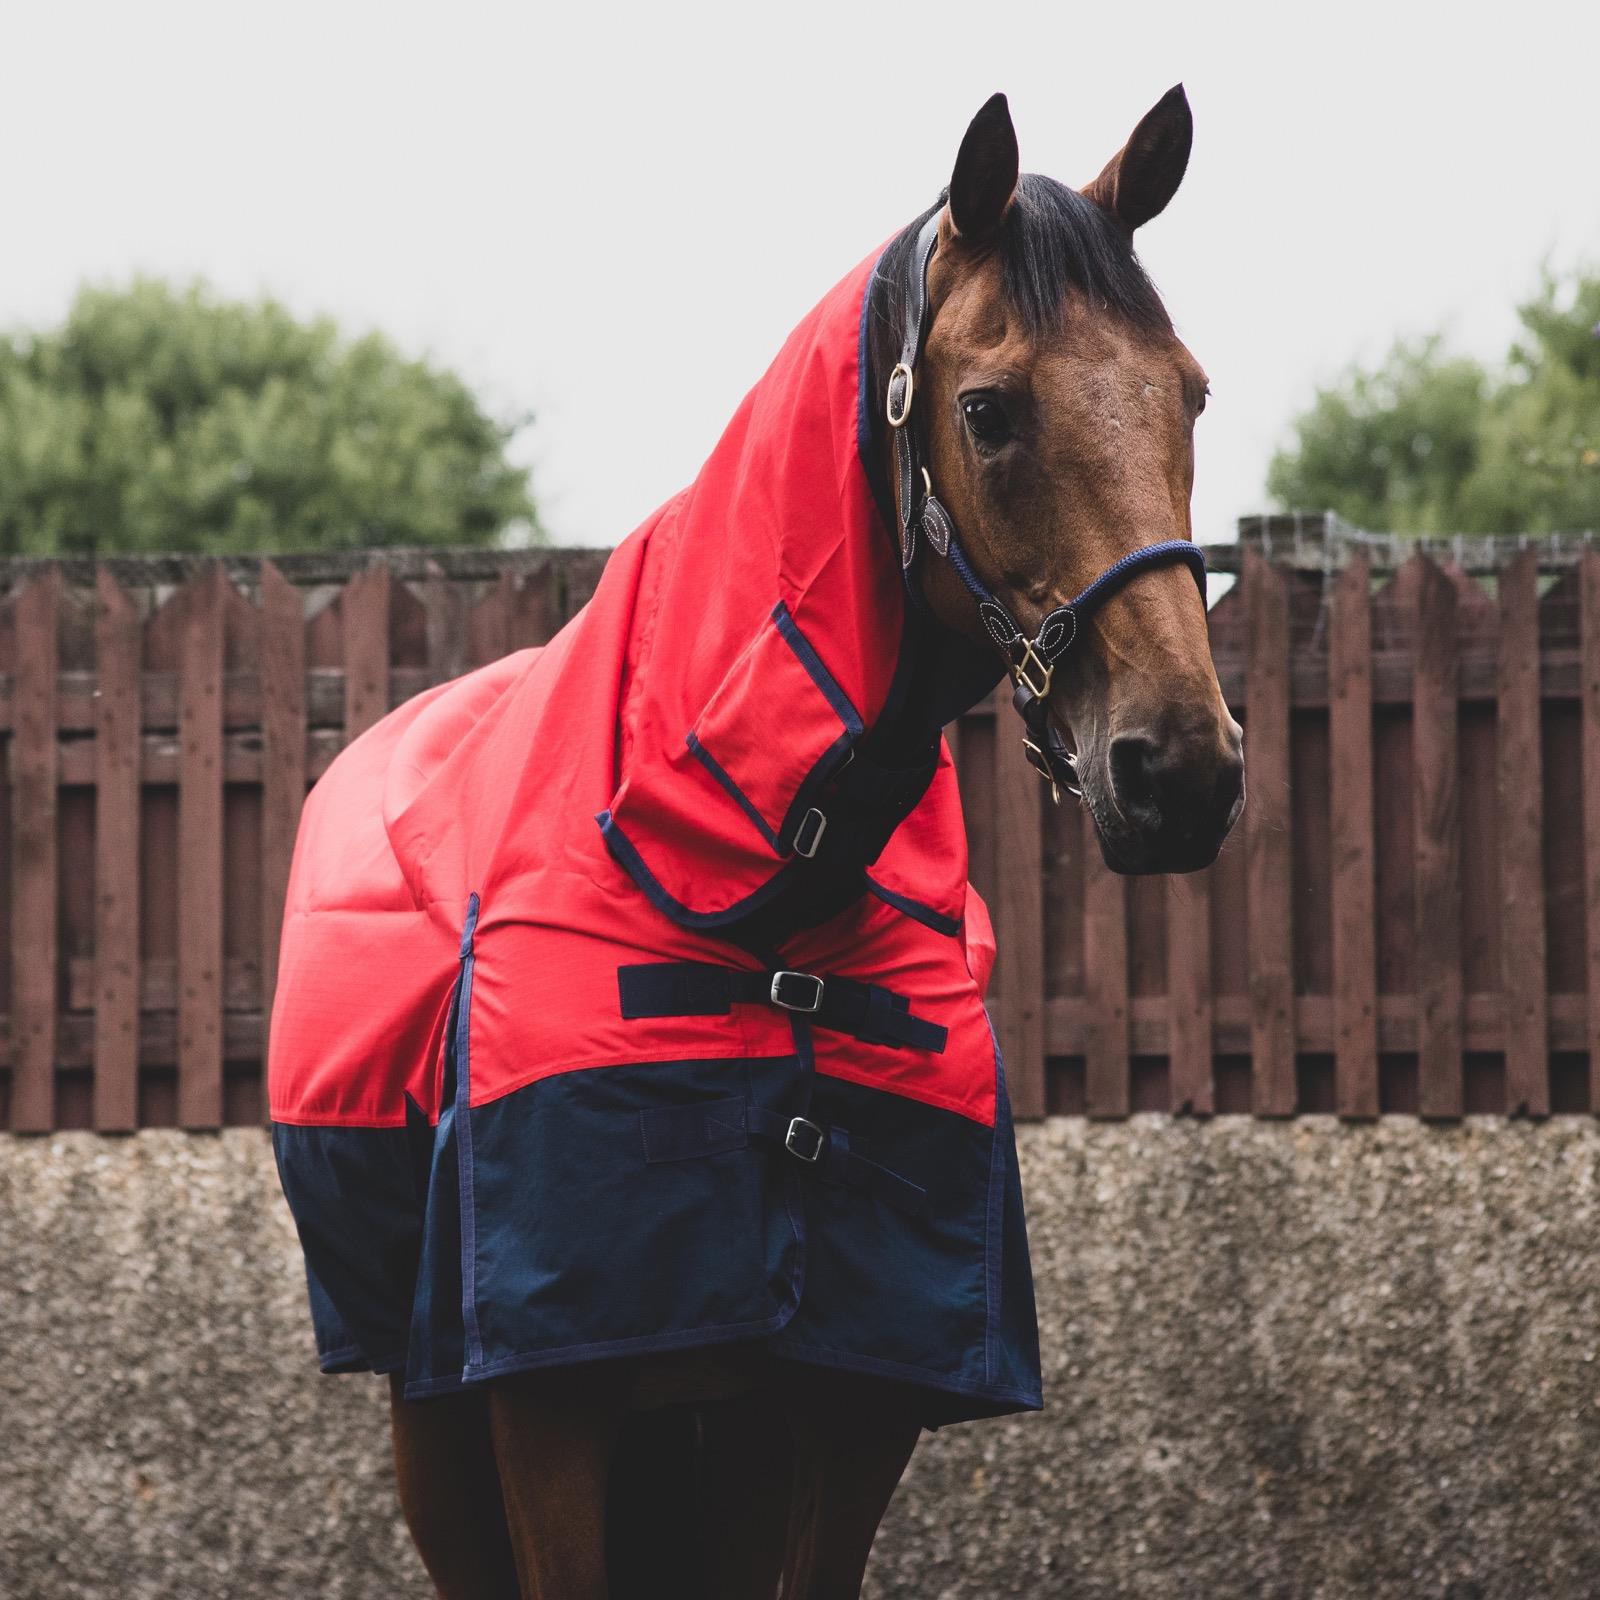 600D Outdoor Winter Turnout Horse Rugs 50G Fill COMBO Full Neck Red/Navy 5'3-6'9 - Tack24